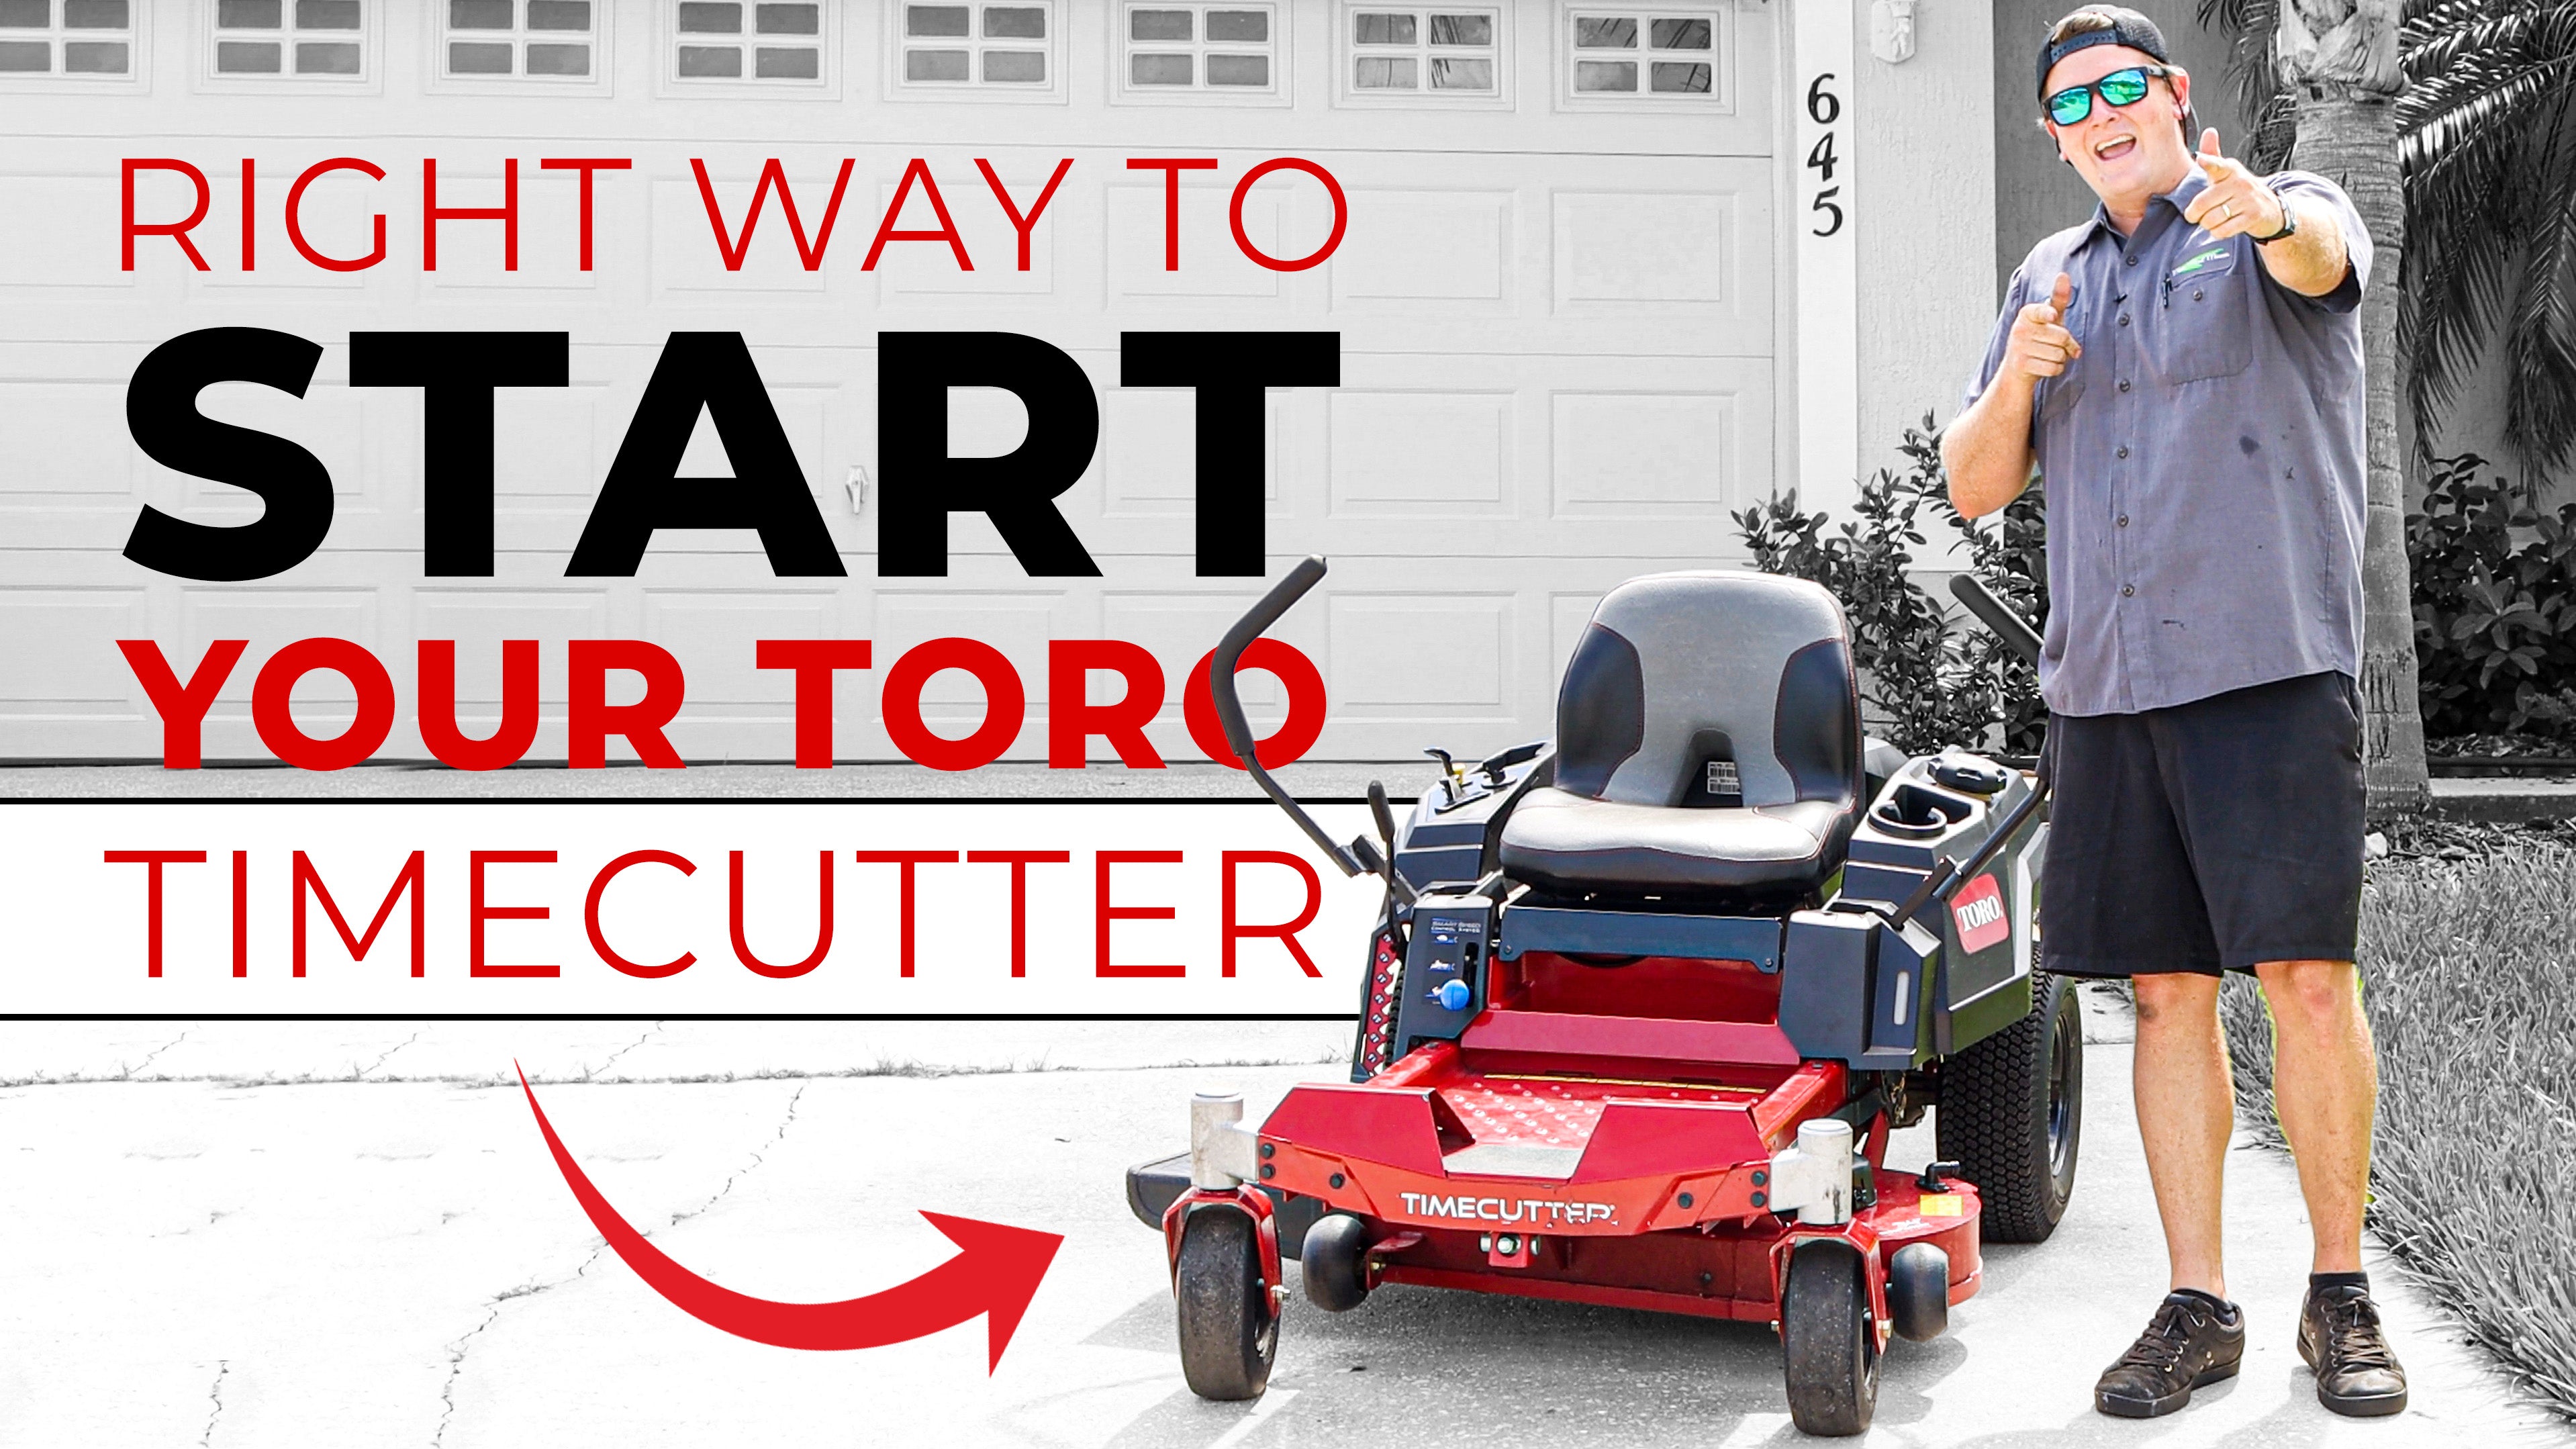 Step-by-step guide to get your Toro TimeCutter up and running! Perfect for beginners. #HomeGarden #LawnCare #DIYLandscaping